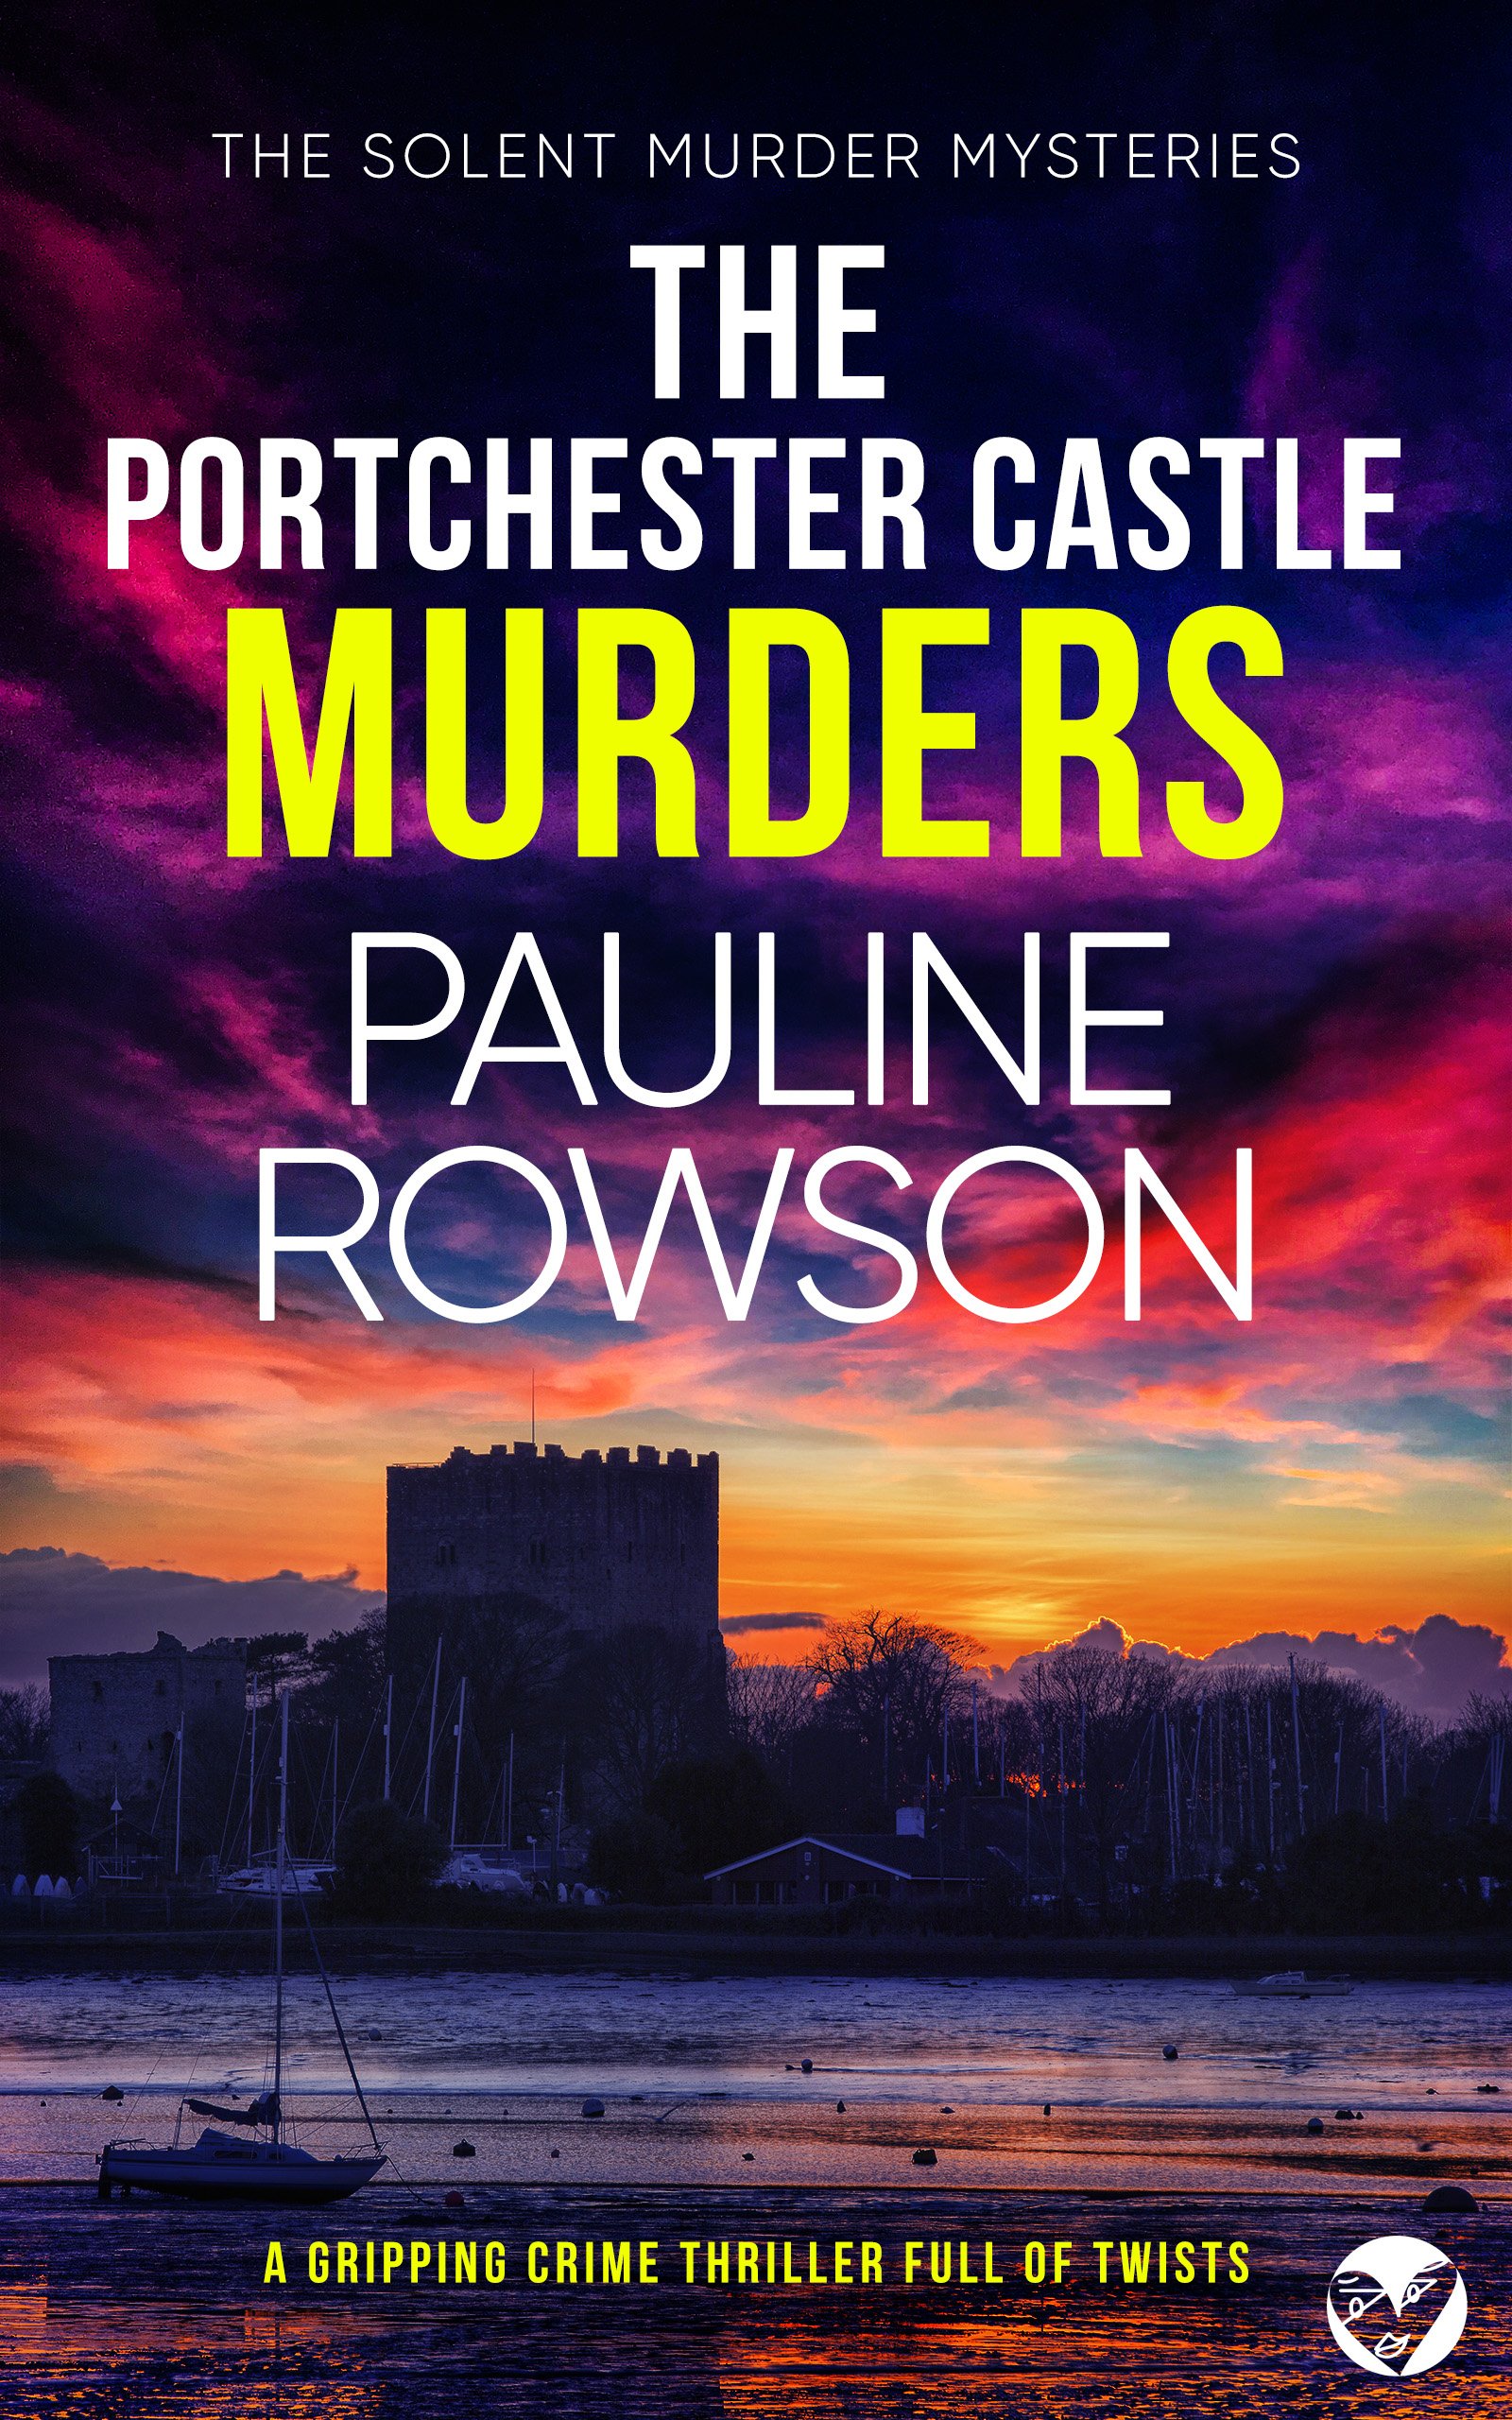 THE PORTCHESTER CASTLE MURDERS Cover publish.jpg